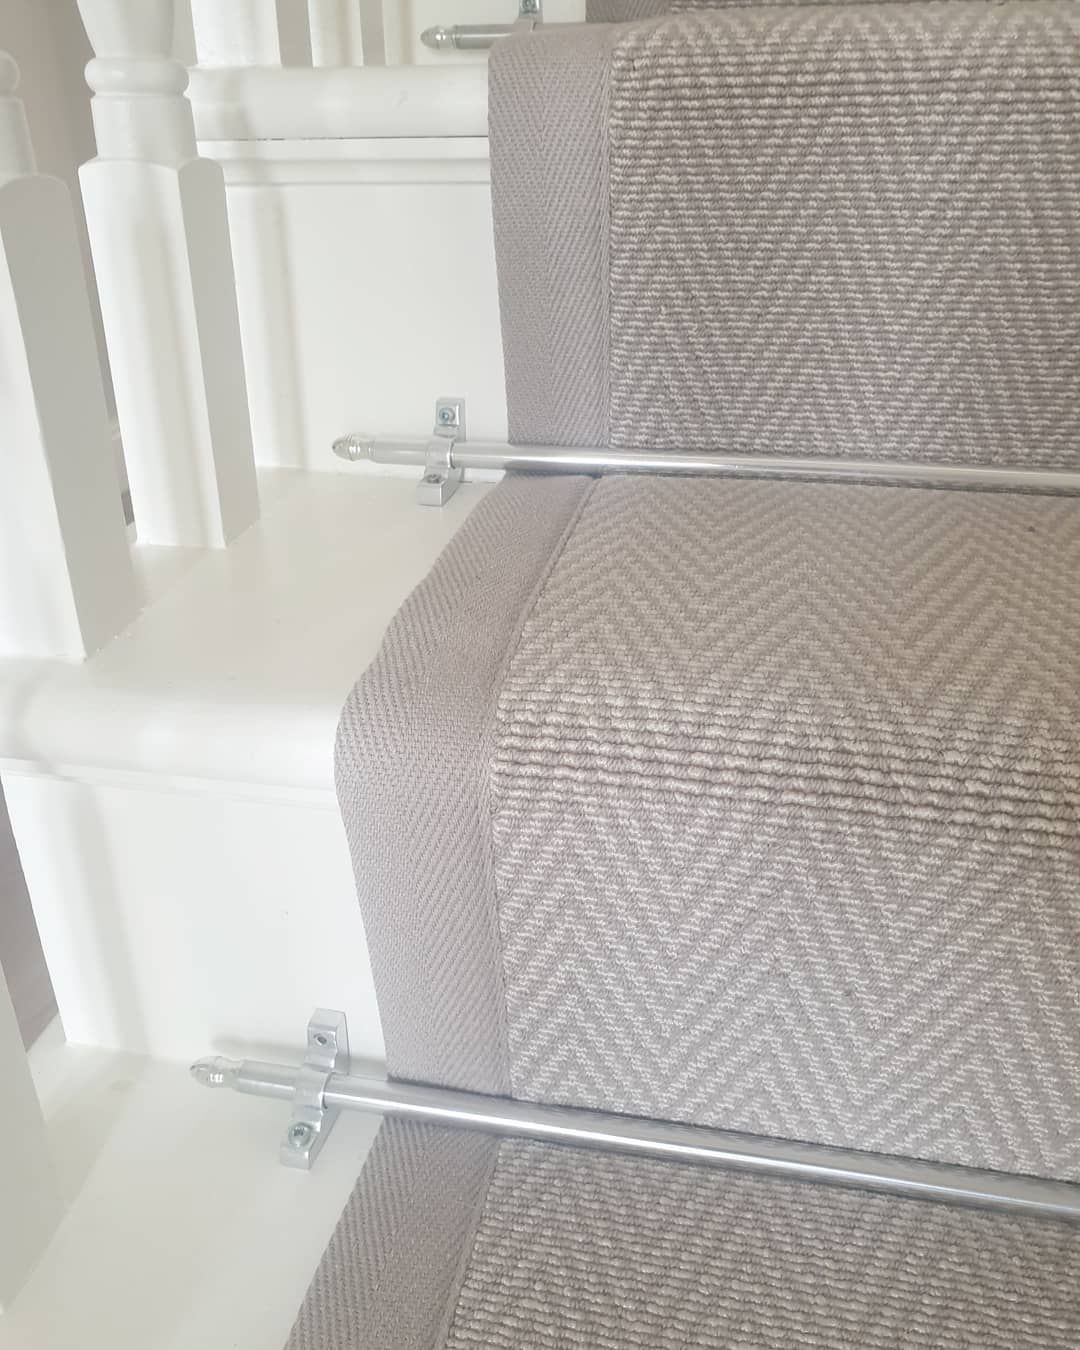 Lorna on Instagram: “Hello new stair runner! Here’s a close up of the beautiful Vogue Herringbone carpet in ‘Stone’ by @mattbrittoncarpets with 2 inch binding…”